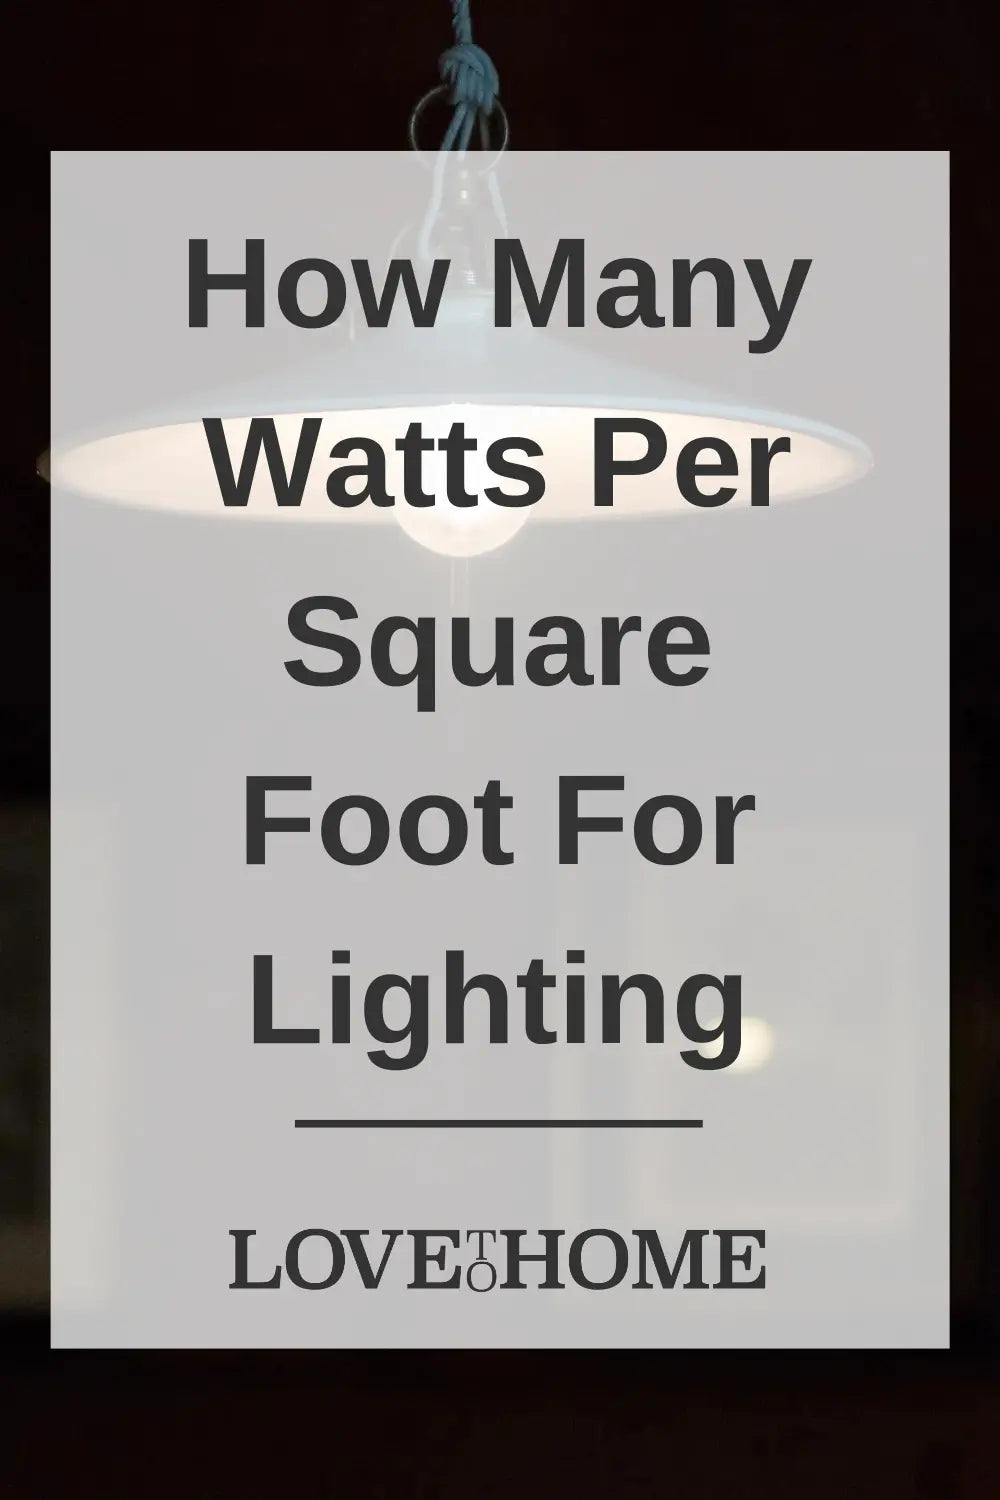 Learn strategies for calculating wattage per square foot